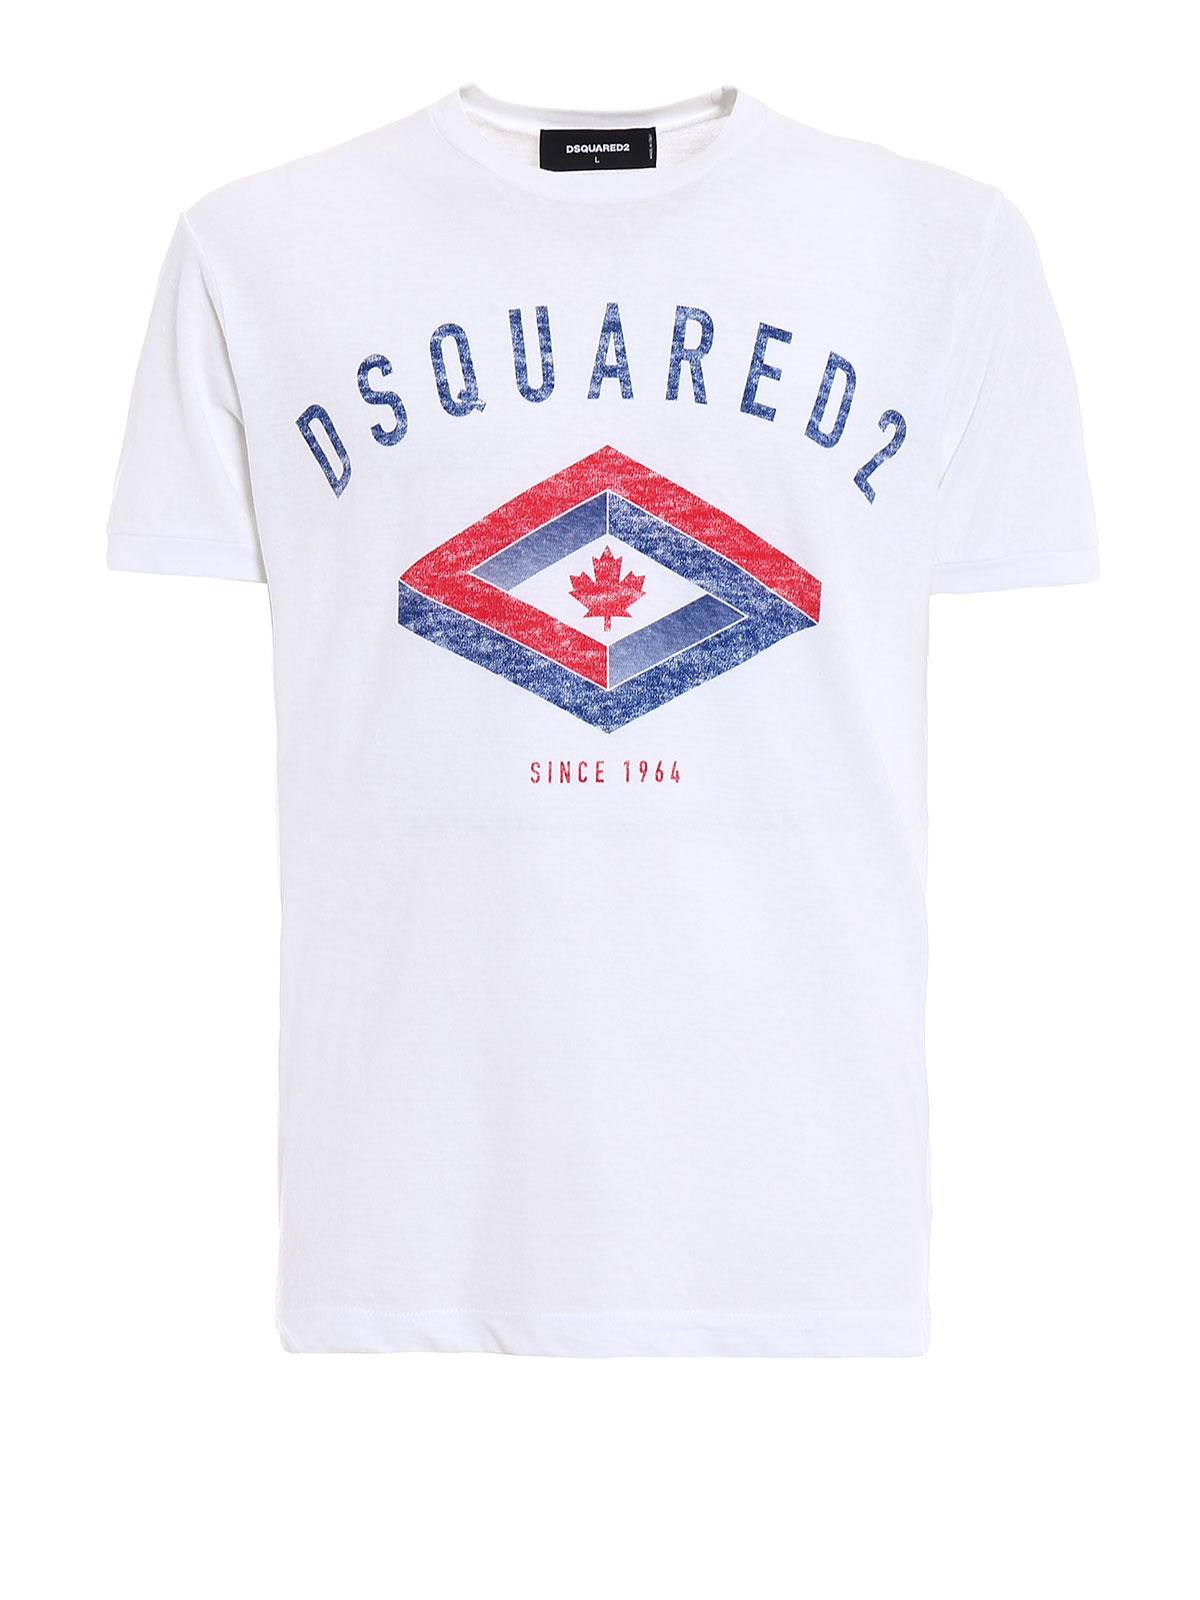 dsquared since 1964